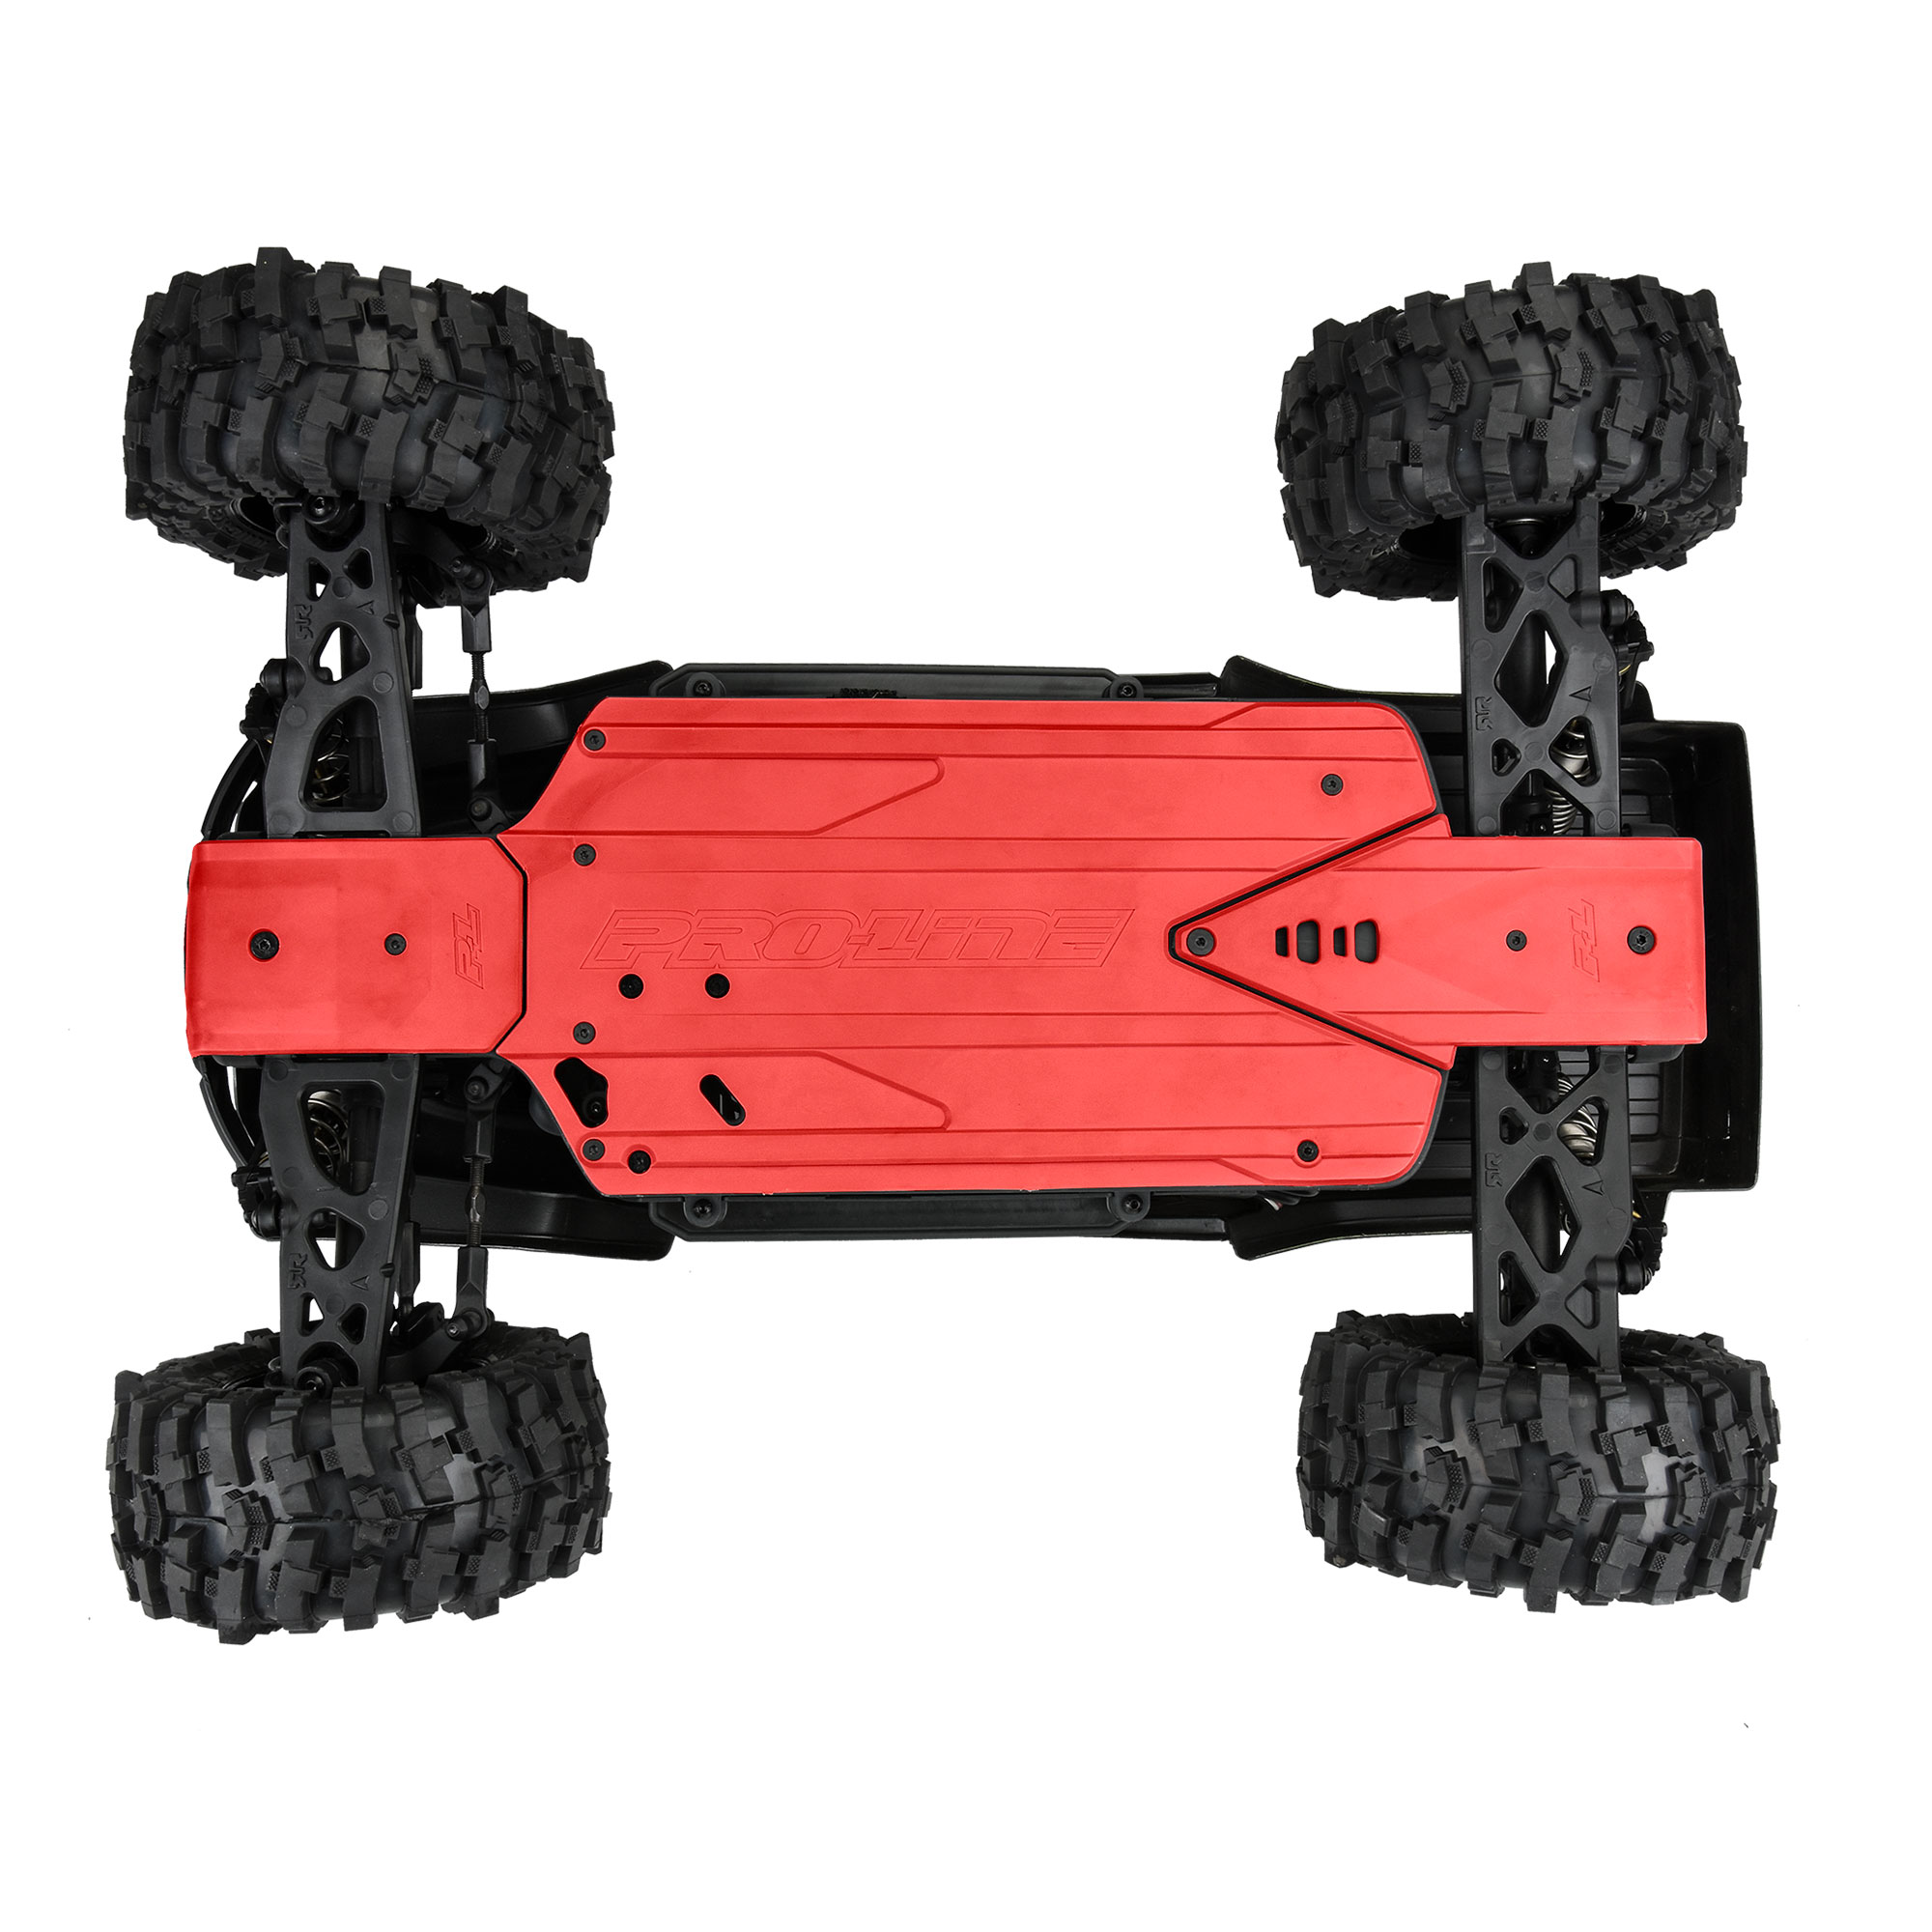 Bash Armor Chassis Protector (Red) for ARRMA 3S Long WB